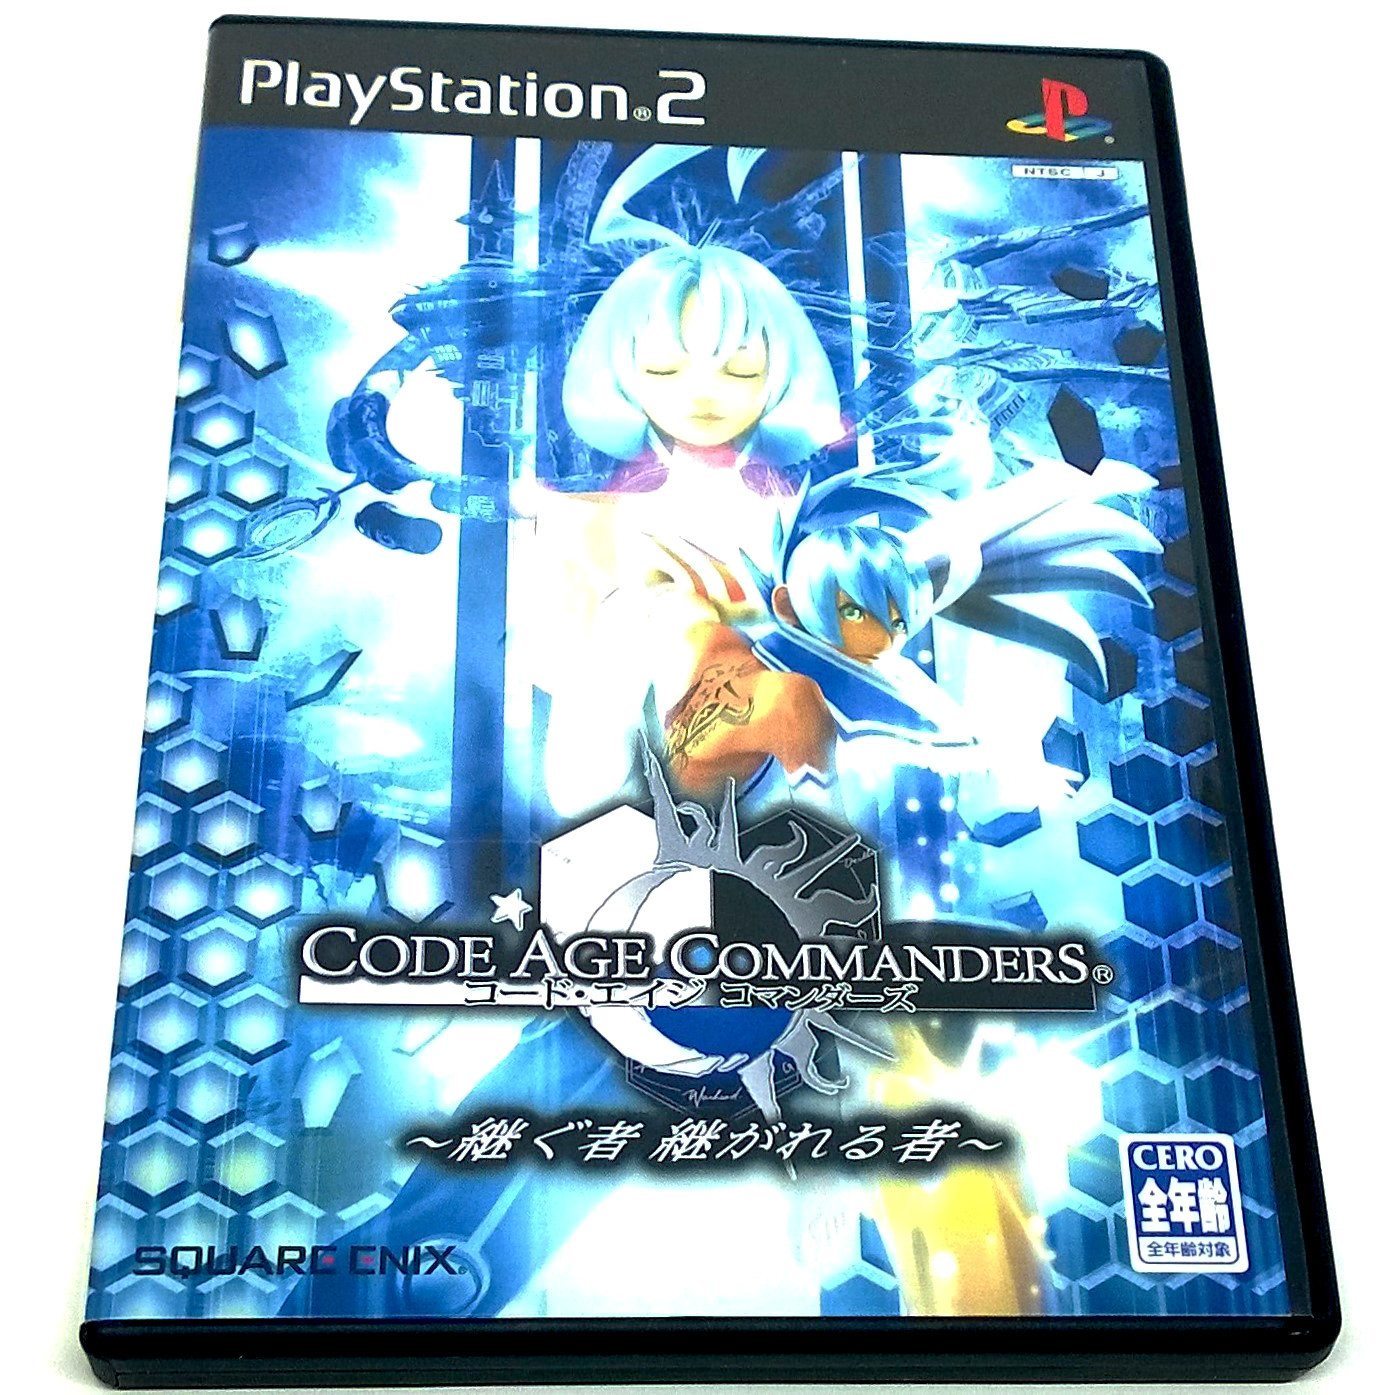 Code Age Commanders for PlayStation 2 (Import) - Front of case